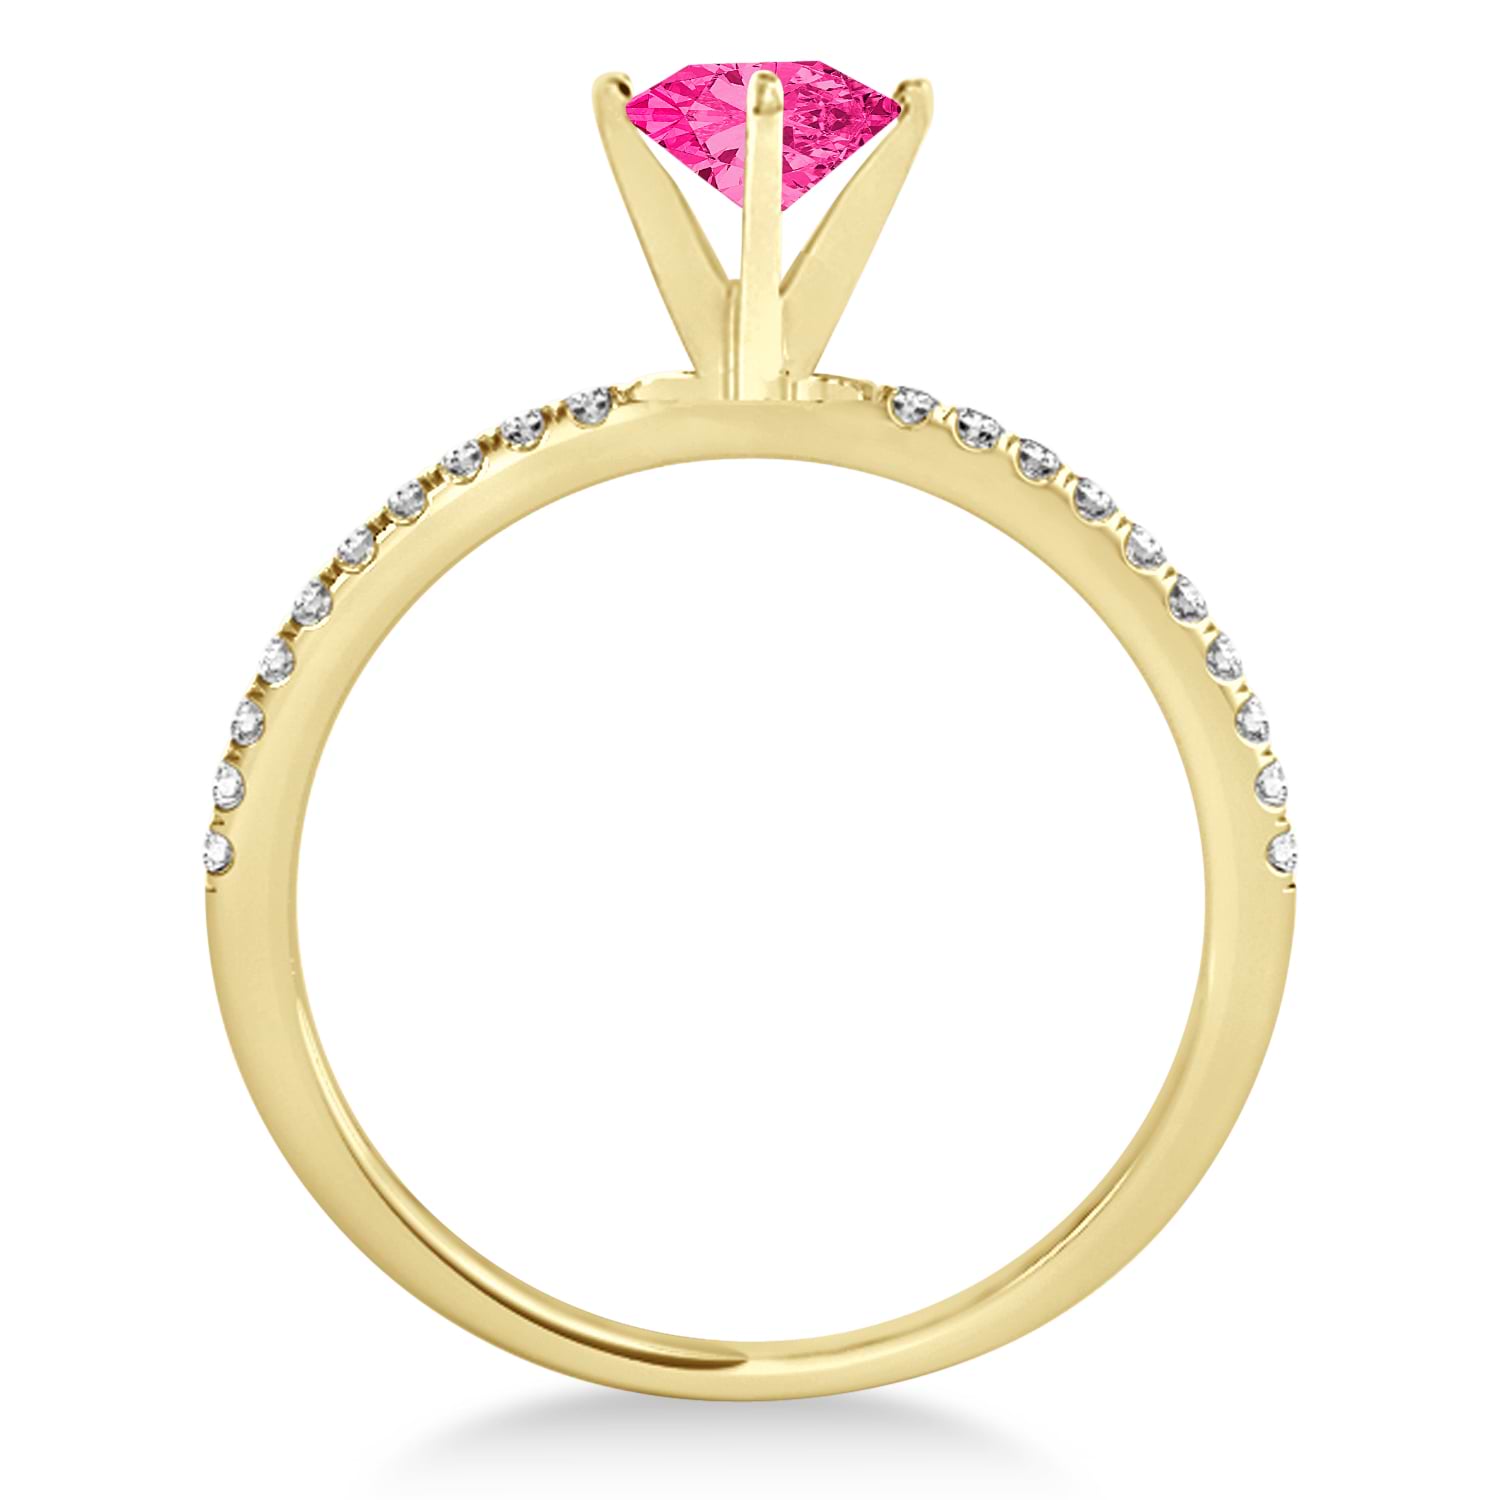 Pink Tourmaline & Diamond Accented Oval Shape Engagement Ring 18k Yellow Gold (1.50ct)